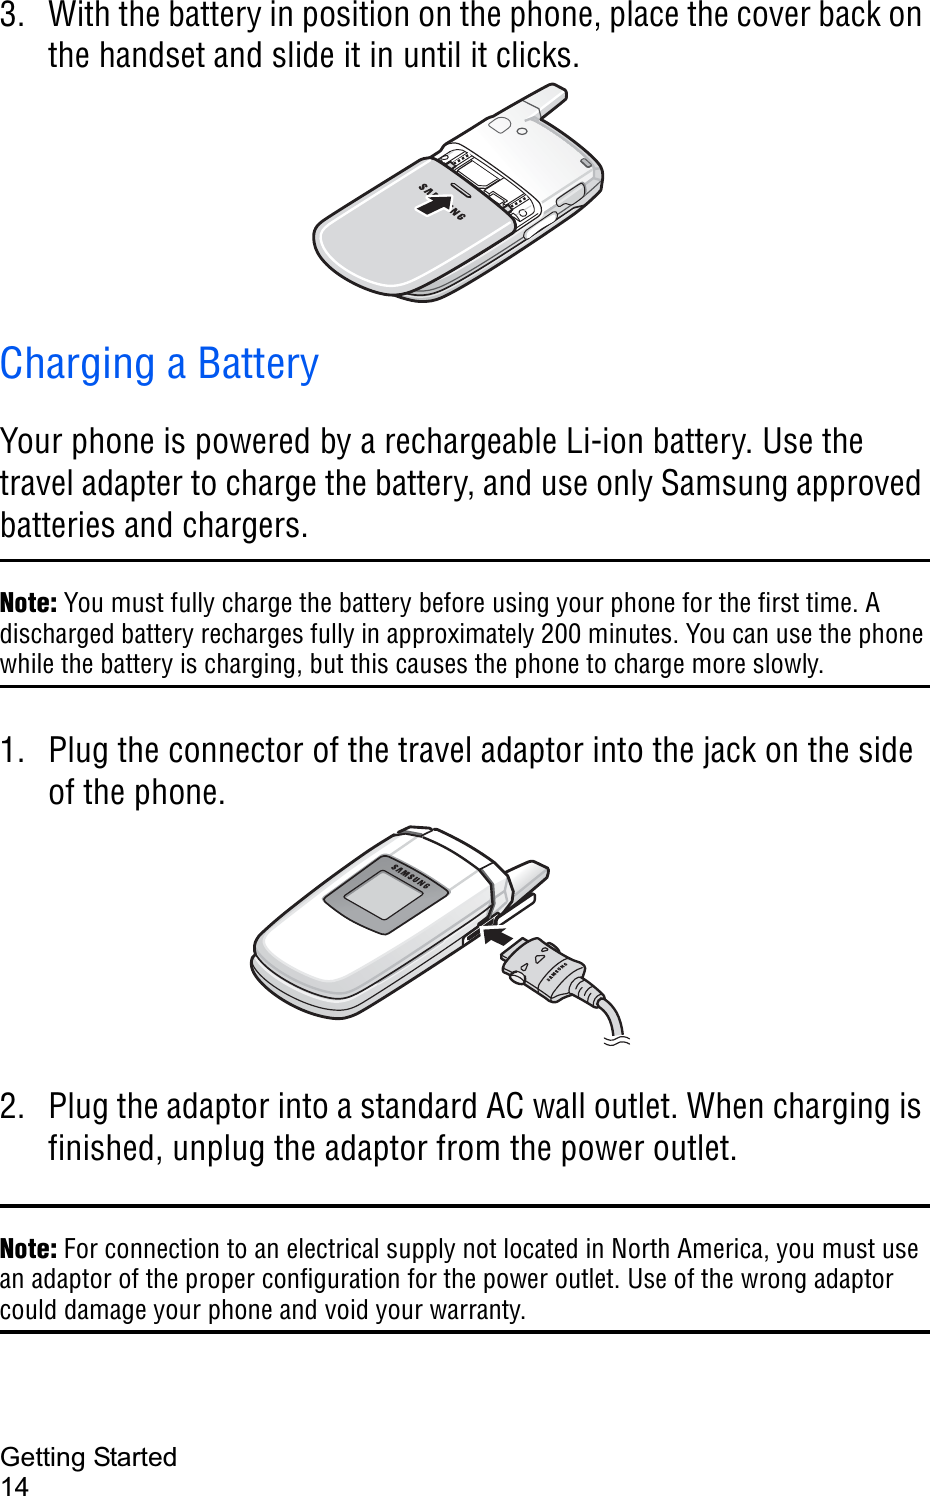 Getting Started143. With the battery in position on the phone, place the cover back on the handset and slide it in until it clicks.Charging a BatteryYour phone is powered by a rechargeable Li-ion battery. Use the travel adapter to charge the battery, and use only Samsung approved batteries and chargers. Note: You must fully charge the battery before using your phone for the first time. A discharged battery recharges fully in approximately 200 minutes. You can use the phone while the battery is charging, but this causes the phone to charge more slowly.1. Plug the connector of the travel adaptor into the jack on the side of the phone. 2. Plug the adaptor into a standard AC wall outlet. When charging is finished, unplug the adaptor from the power outlet.Note: For connection to an electrical supply not located in North America, you must use an adaptor of the proper configuration for the power outlet. Use of the wrong adaptor could damage your phone and void your warranty. 